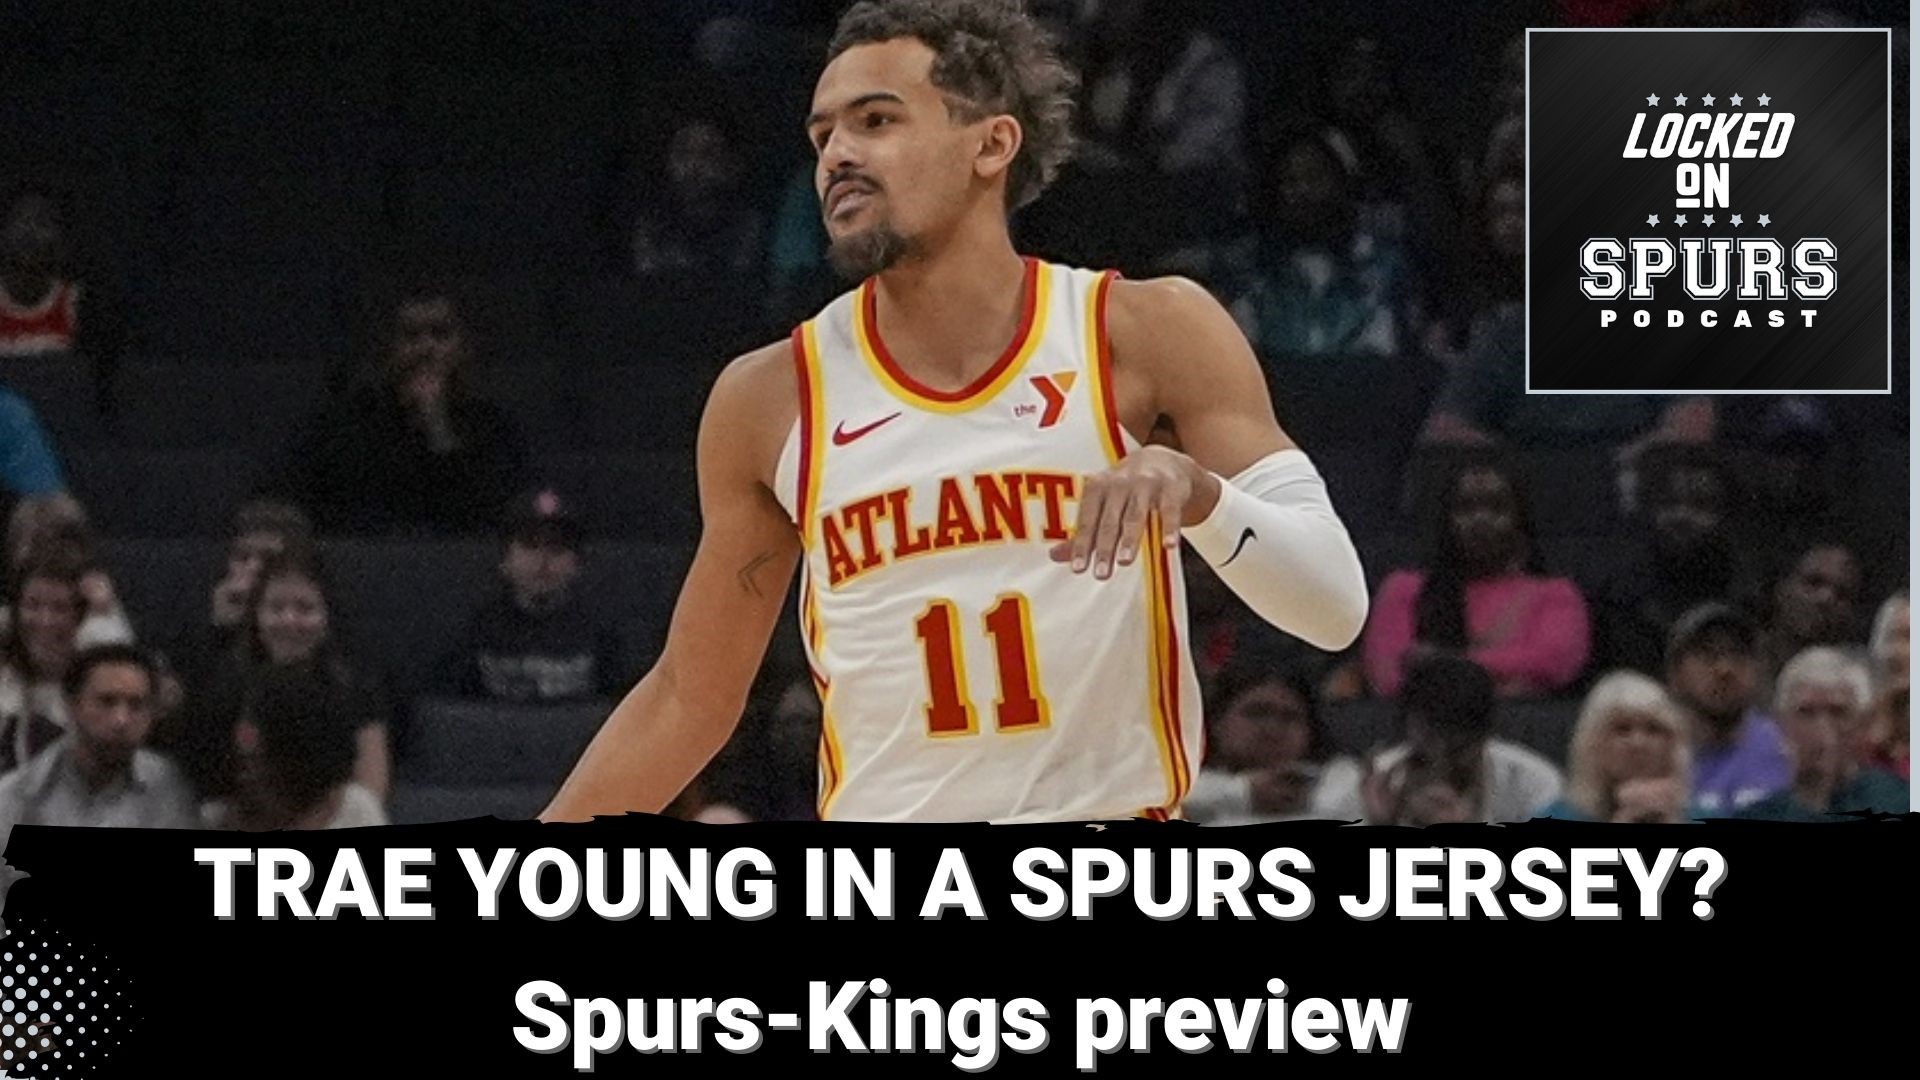 Also, previewing tonight's Spurs-Kings matchup.